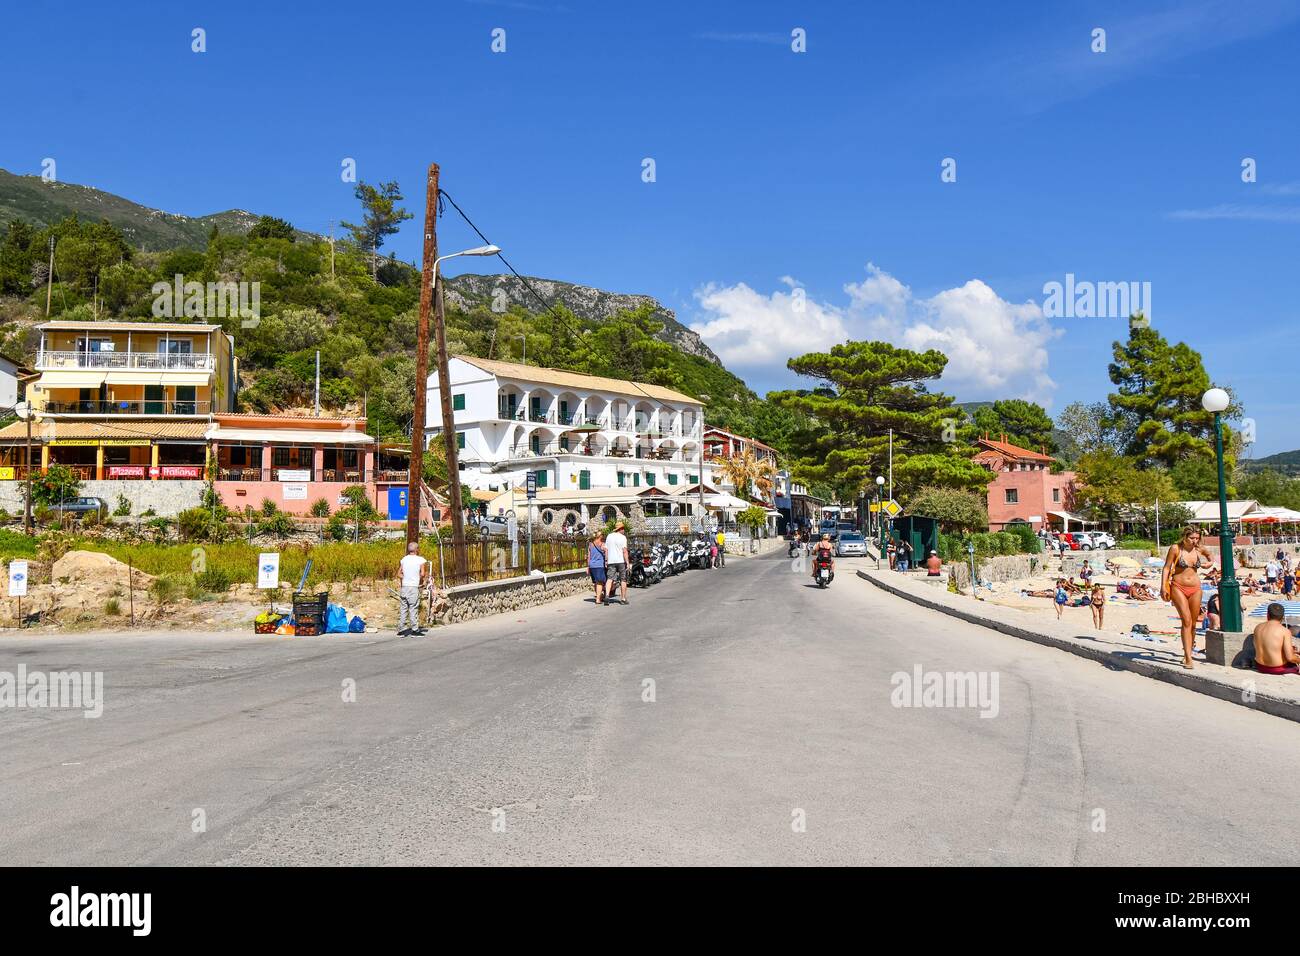 The beachfront Mediterranean village of Palaiokastritsa on the island of Corfu, Greece, in the Ionian Sea, on a summer day filled with tourists. Stock Photo